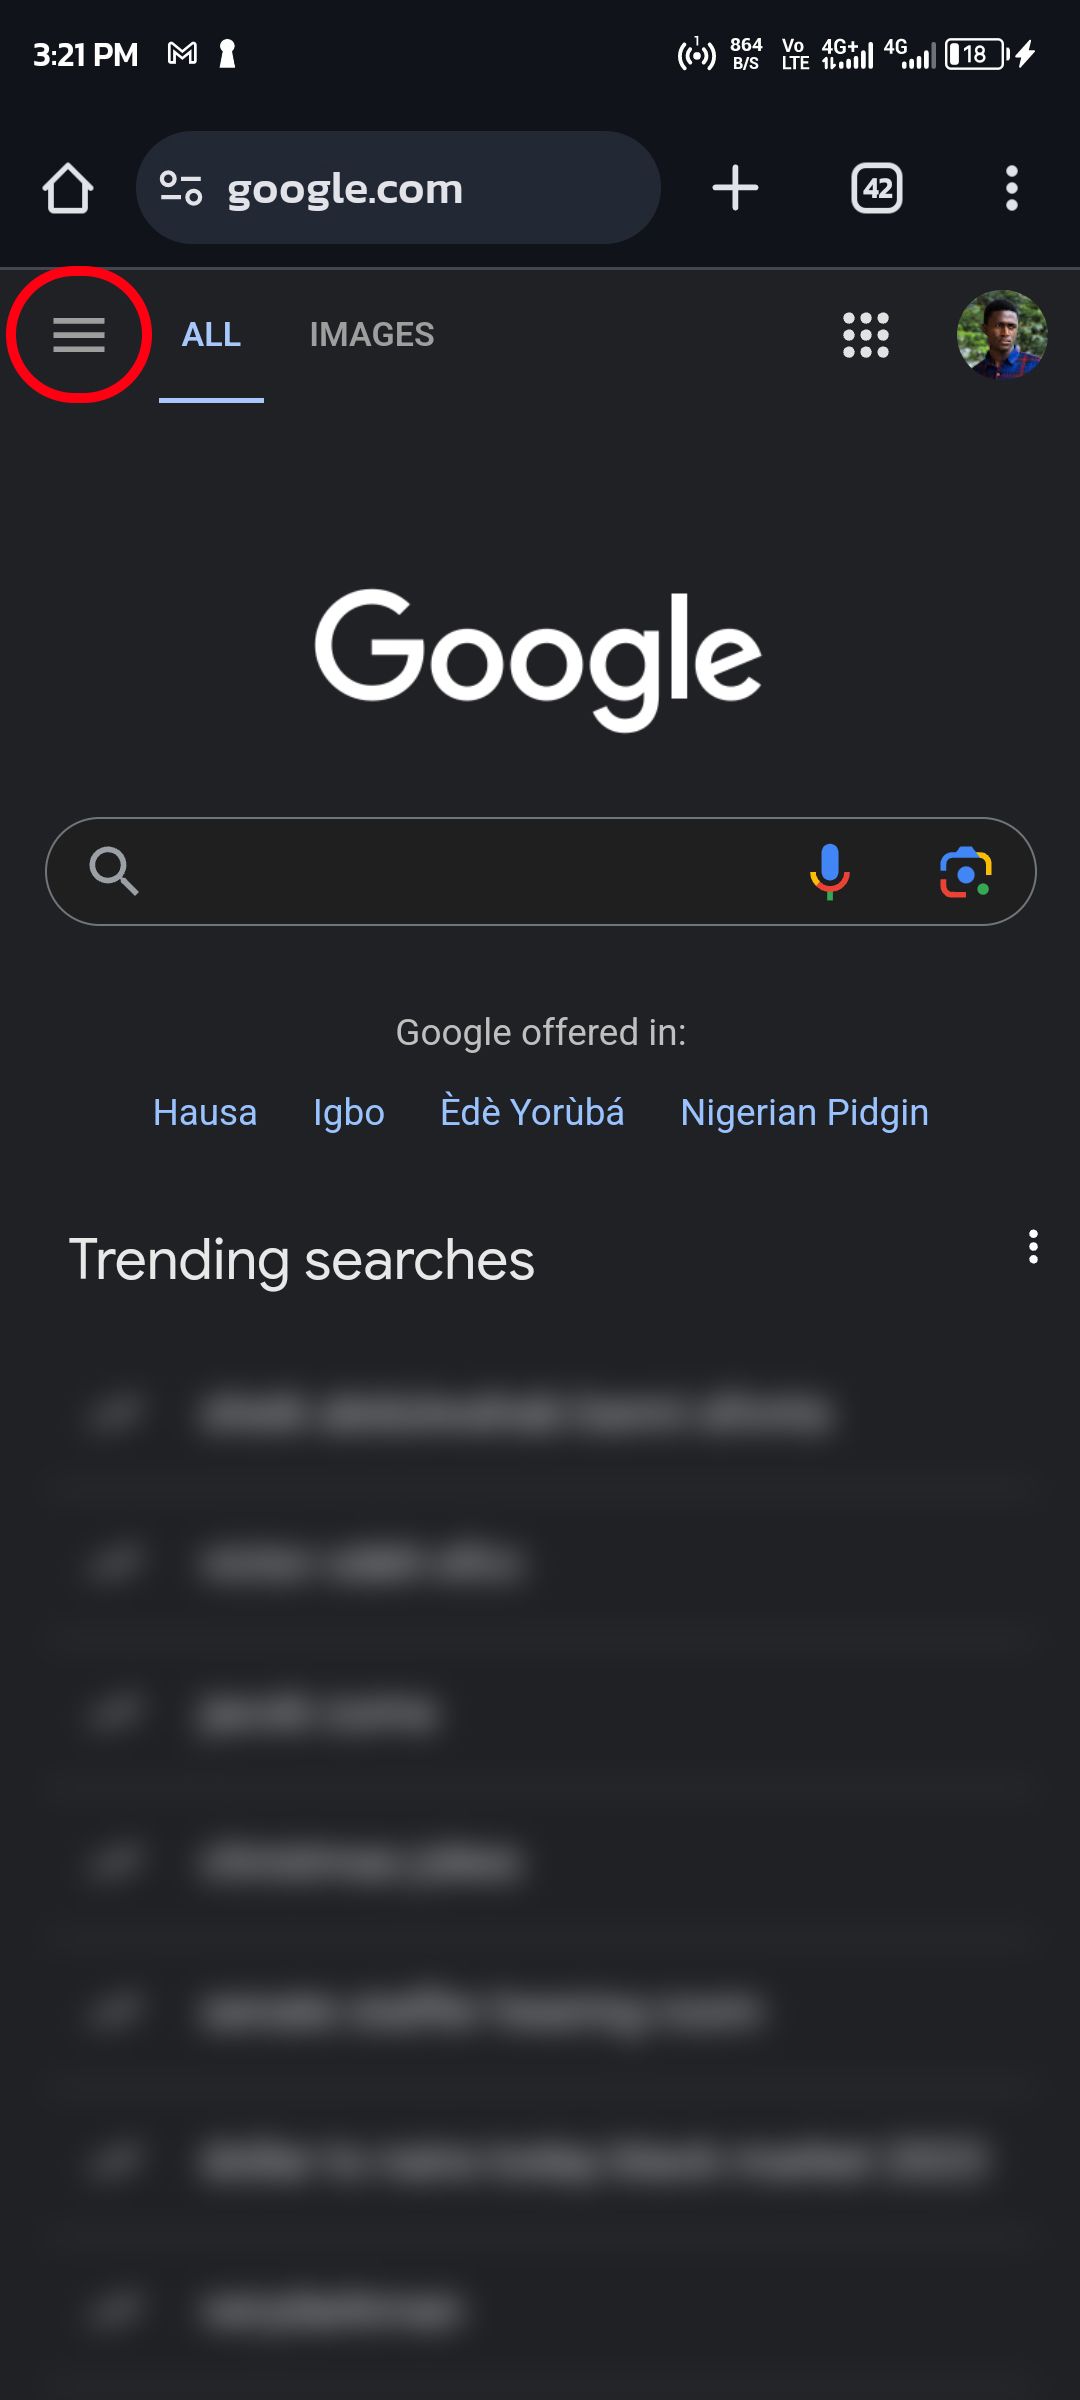 Accessing Google Search menu on mobile